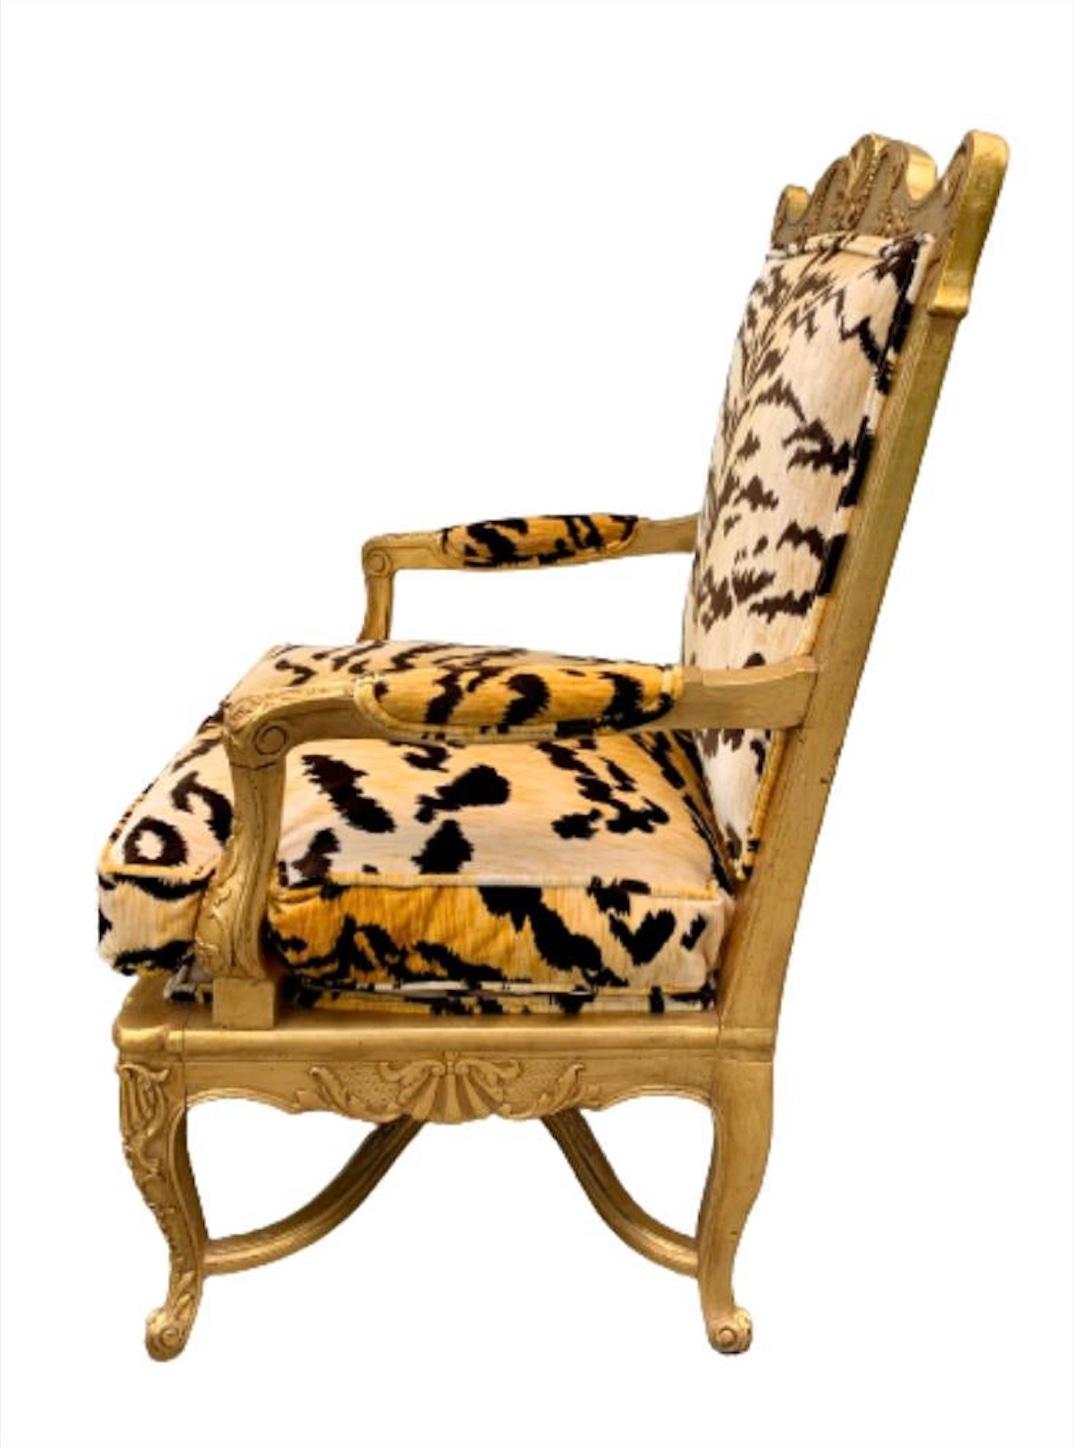 French Regency Giltwood Fauteuil Lounge Chair in Scalamandré Le Tigre Tiger Silk For Sale 3